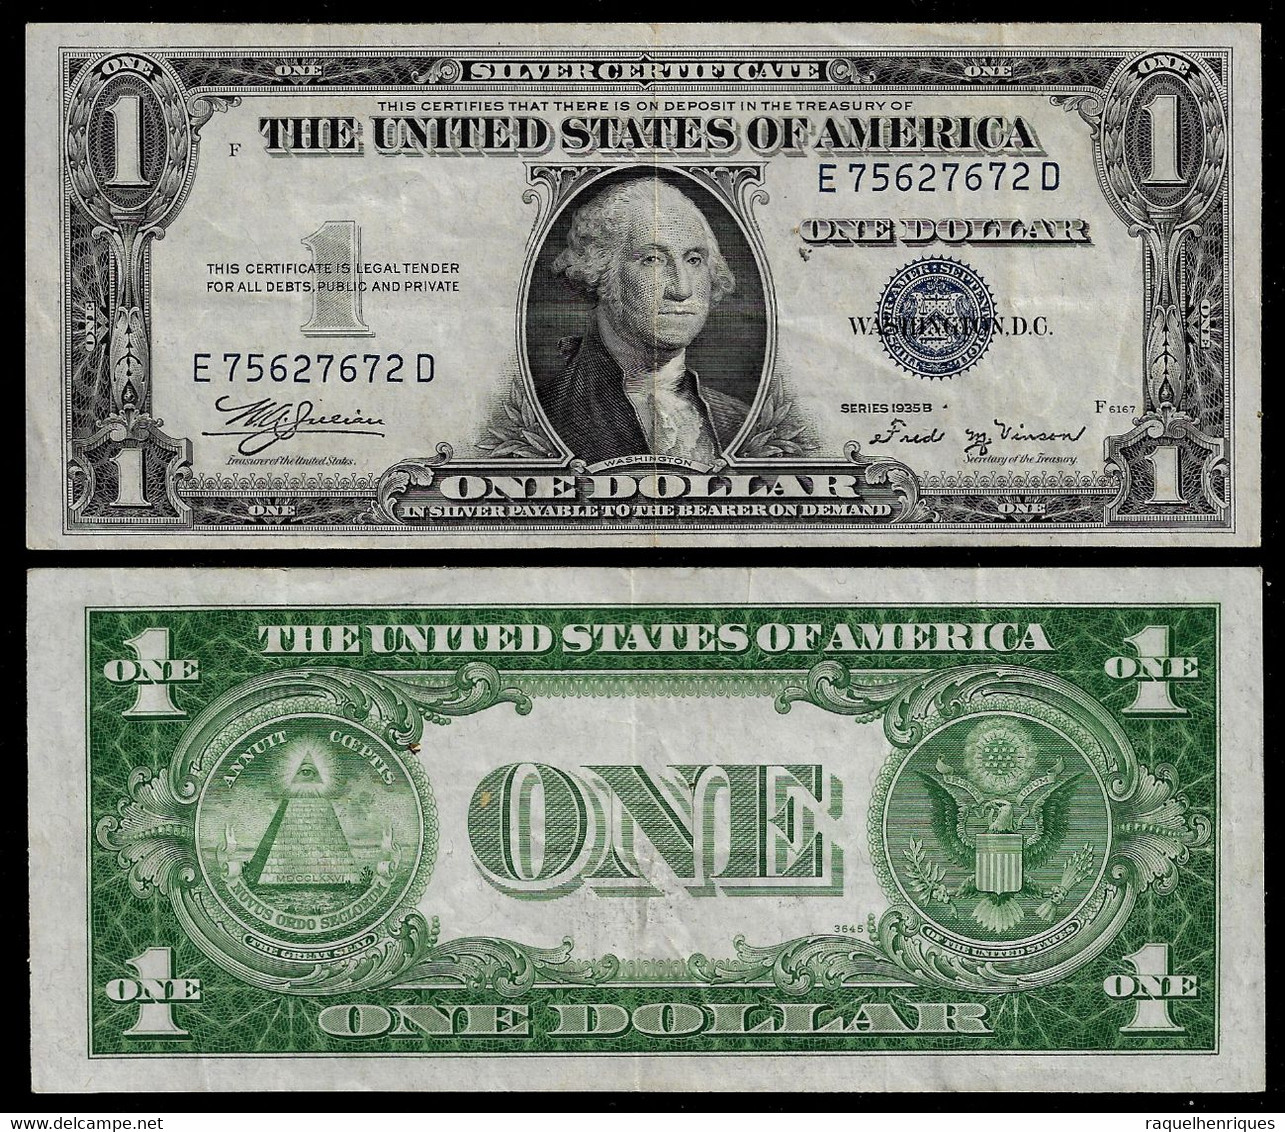 UNITED STATES SILVER CERTIFICATE BANKNOTE - 1 DOLLAR 1935B - BLUE SEAL - VF (NT#03) - Silver Certificates (1928-1957)